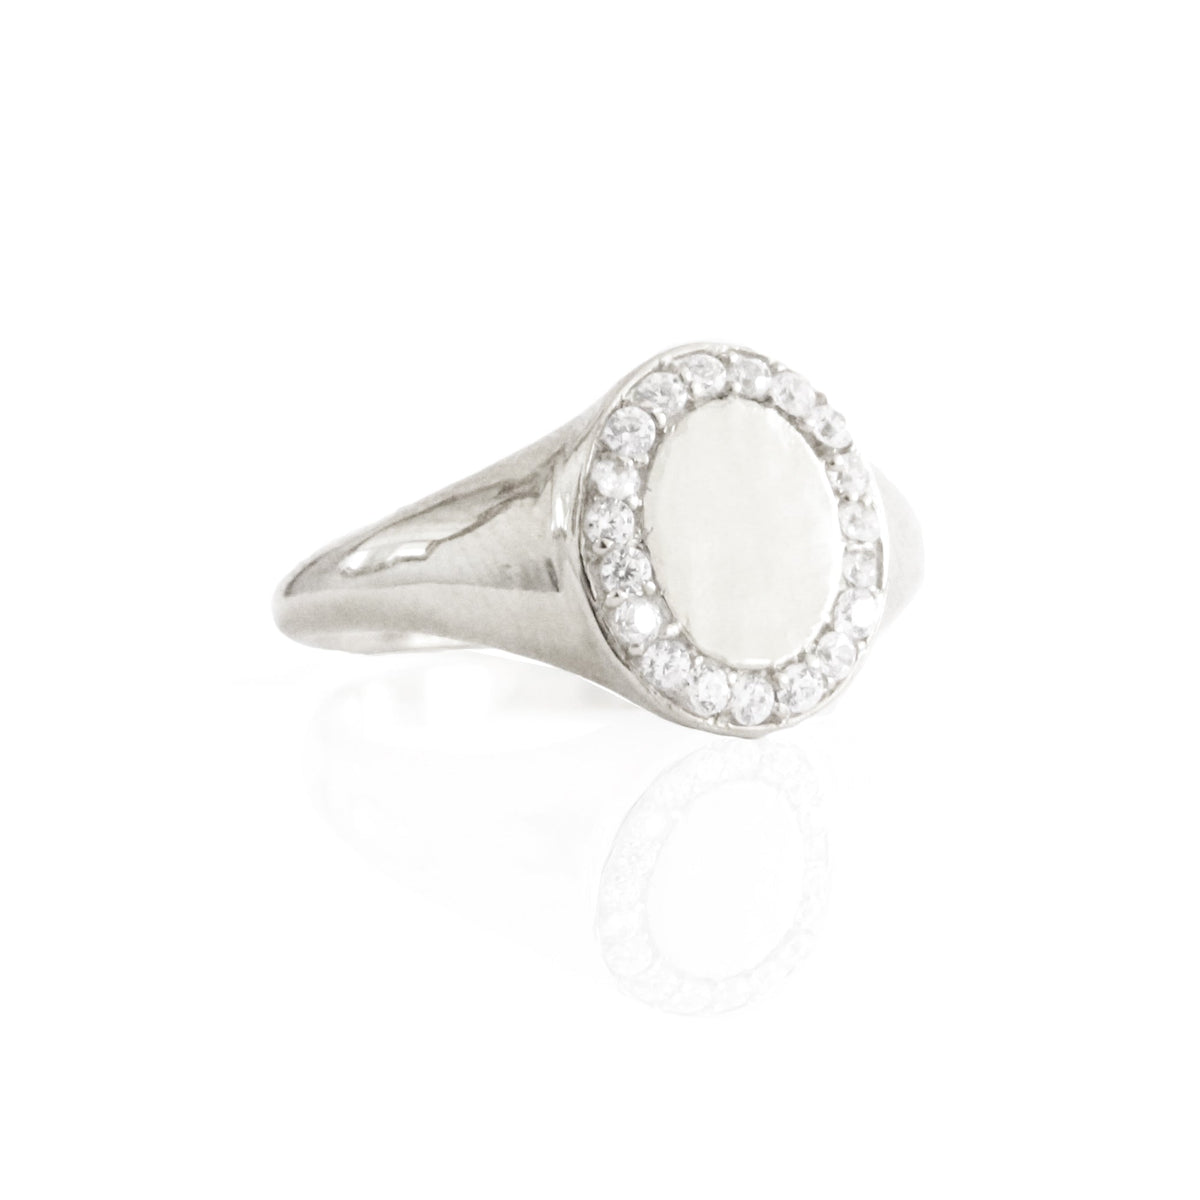 LOVE OVAL SIGNET RING - CUBIC ZIRCONIA &amp; SILVER - SO PRETTY CARA COTTER